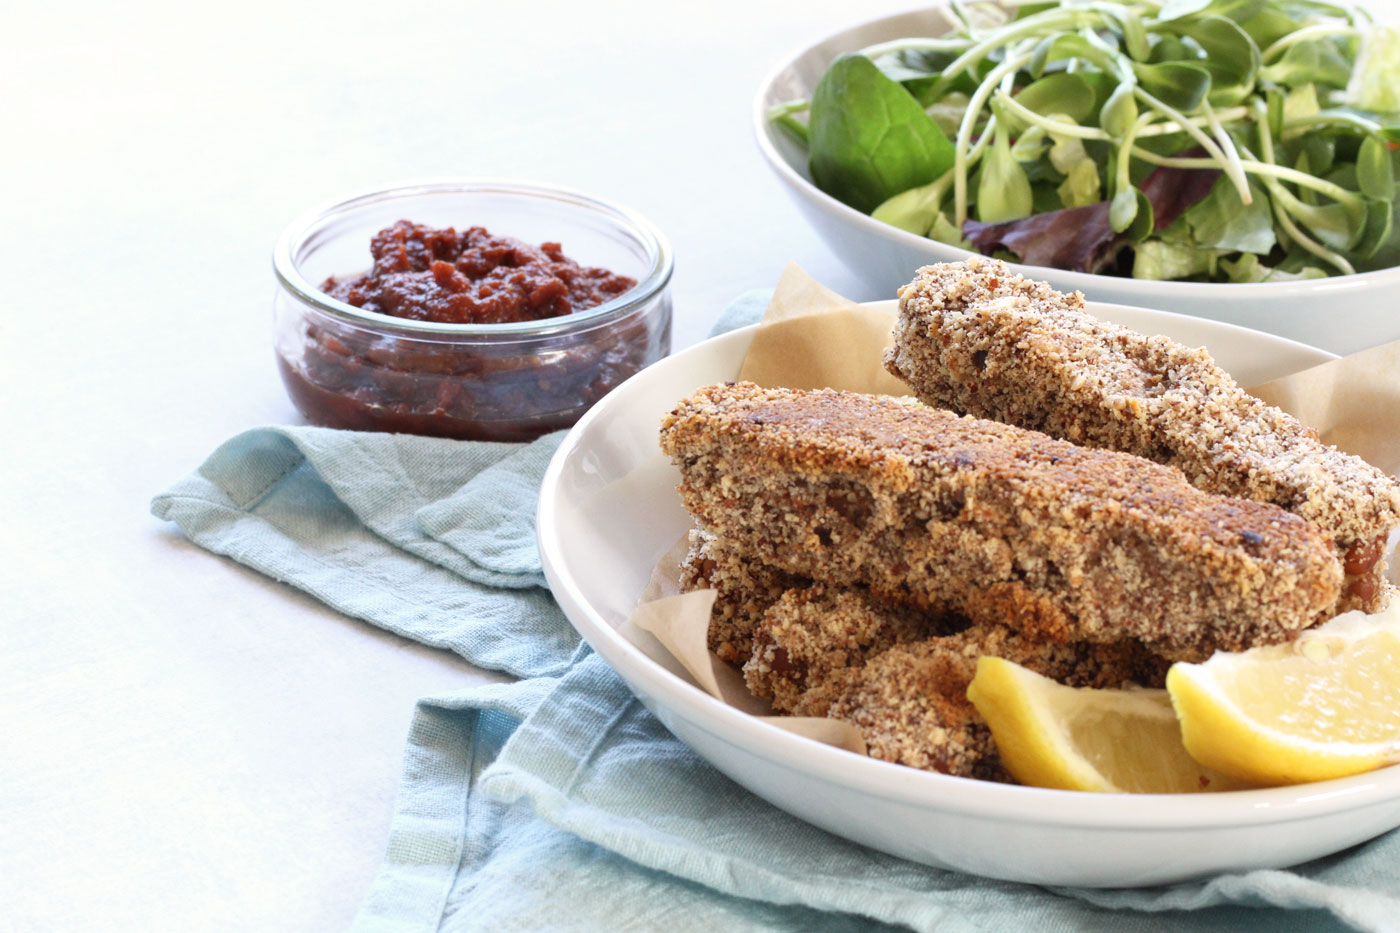 Baked tempeh fingers by Active Vegetarian